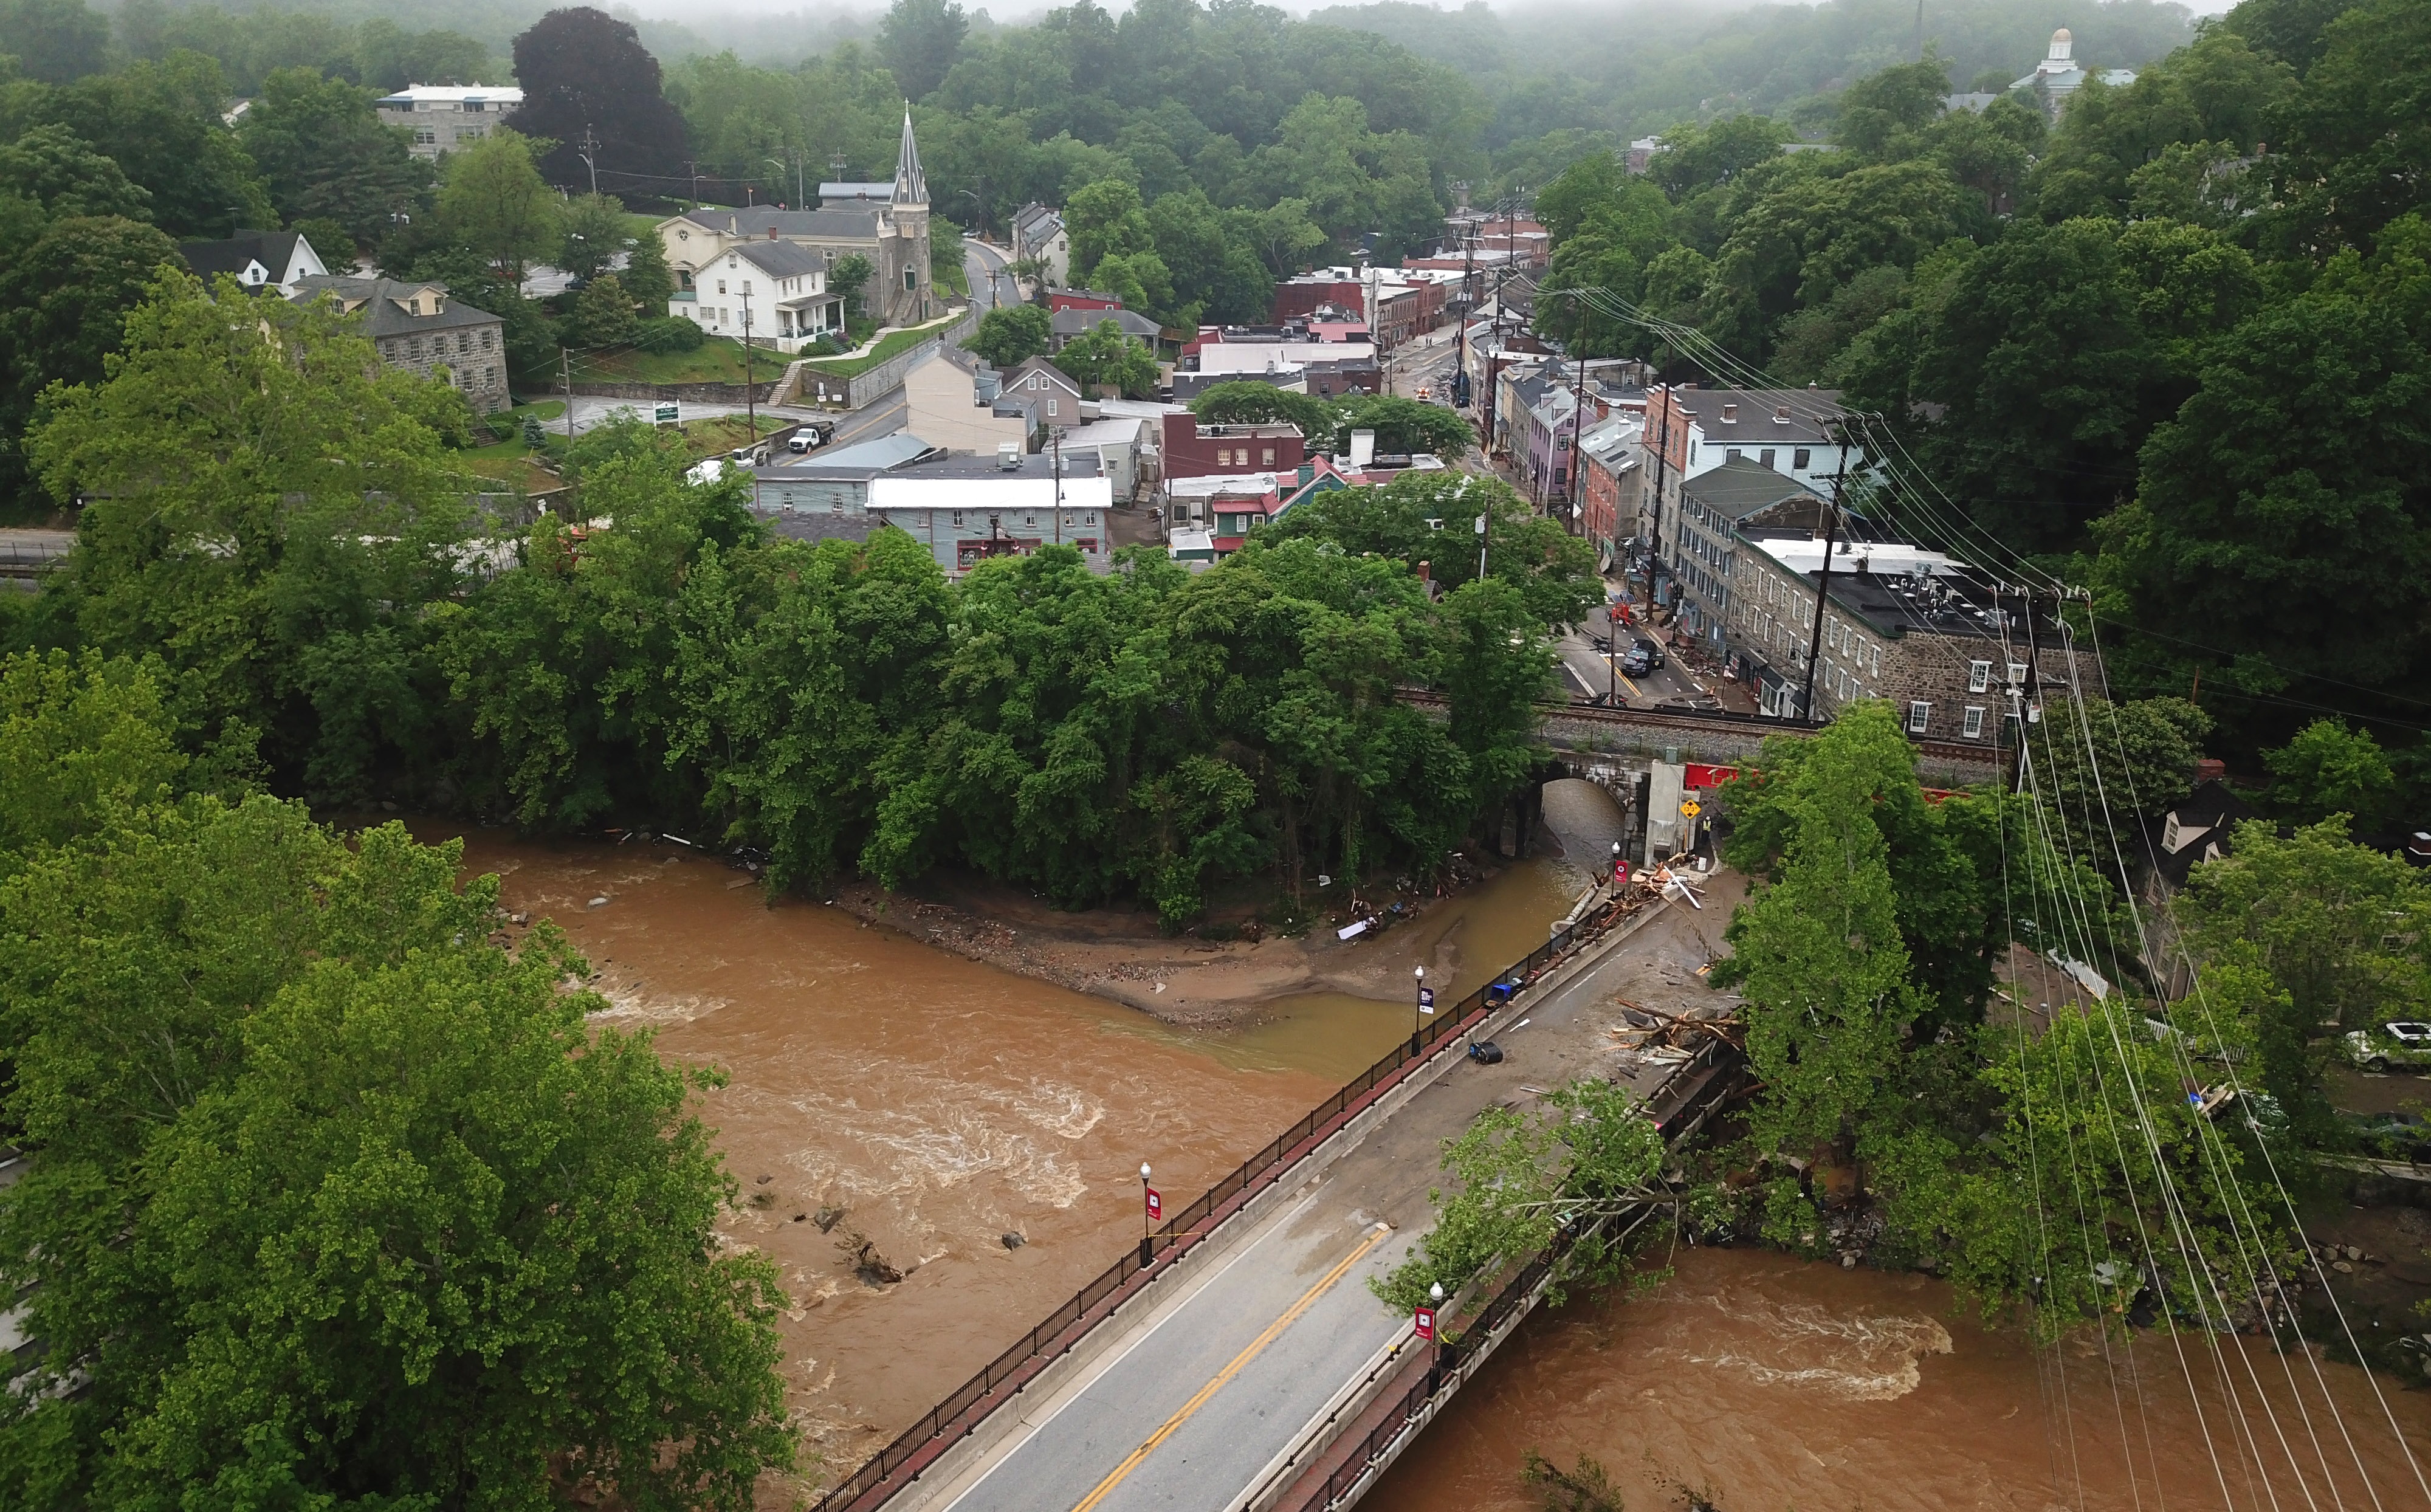 Main Street in Ellicott City is seen from above the day after a flash flood devastated the historic city on the Patapsco River. Photo: Jerry Jackson, permission from Baltimore Sun Media. All rights reserved.